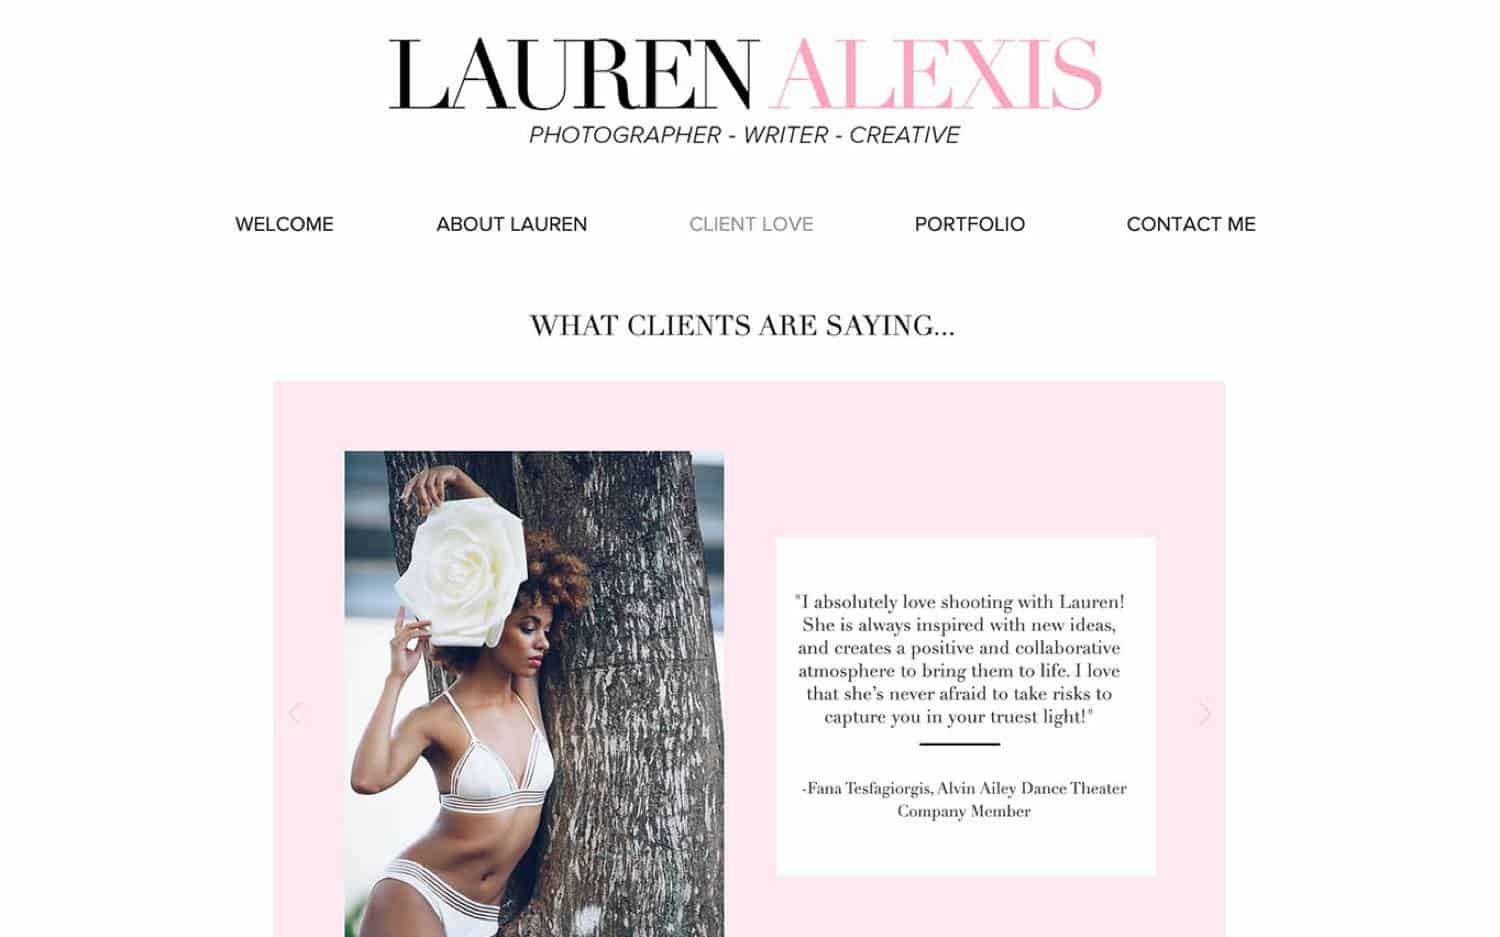 The Testimonials page on Lauren Alexis' photography website showcases a photograph of a dark-skinned woman wearing white cotton underwear and leaning against a tree. Beside her photo is a pink box containing a text overlay of the client's rave review of Lauren's work.